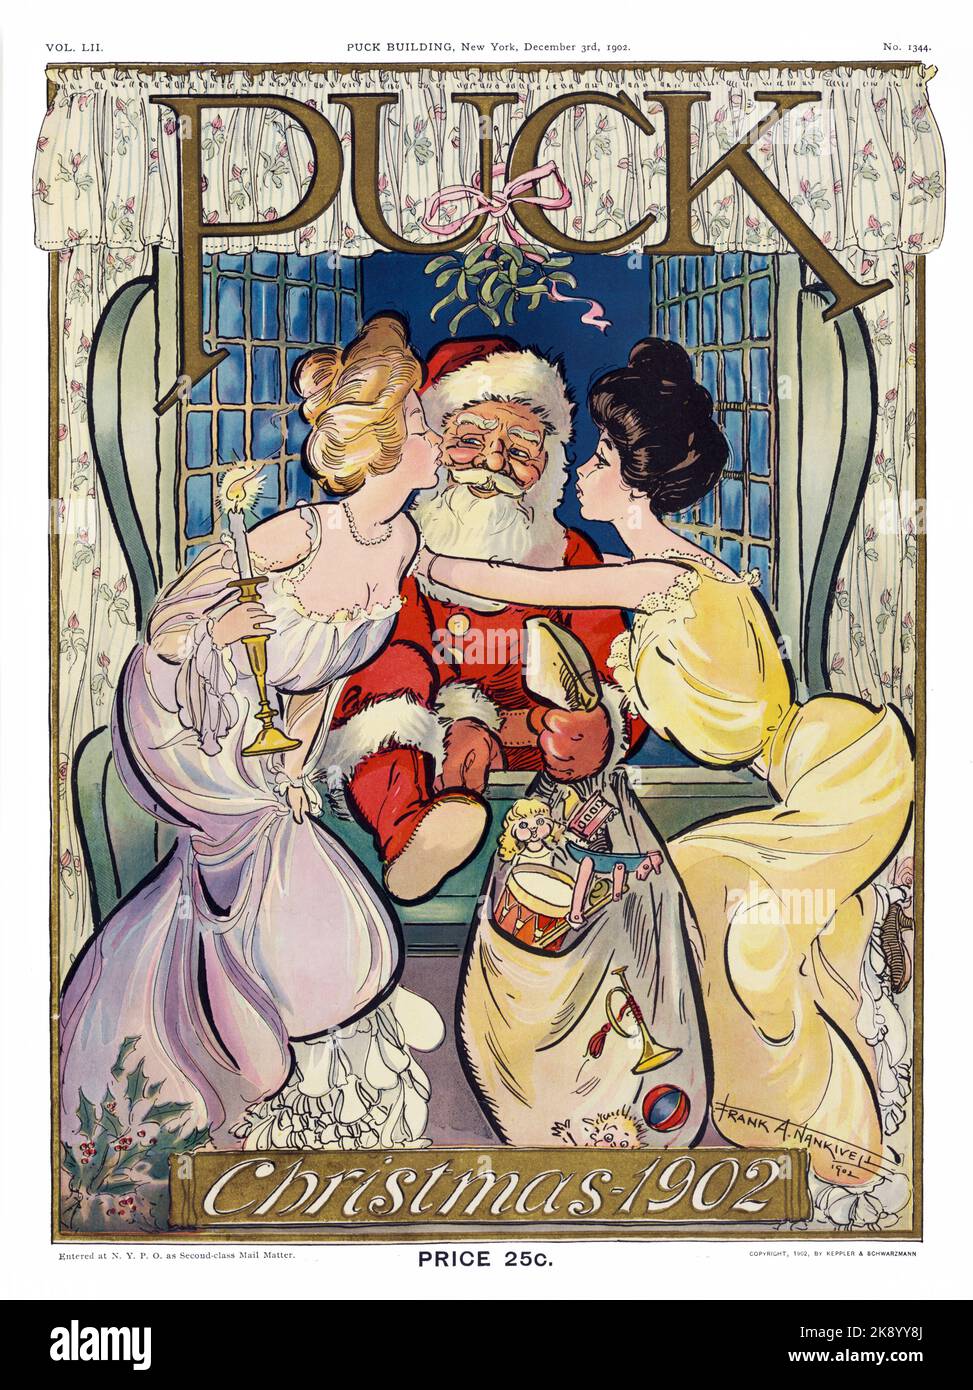 Puck Christmas cover 1902 - Frank A. Nankivell 1902 - Illustration shows two young women kissing Santa Claus as he enters through a window with his bag of toys Stock Photo